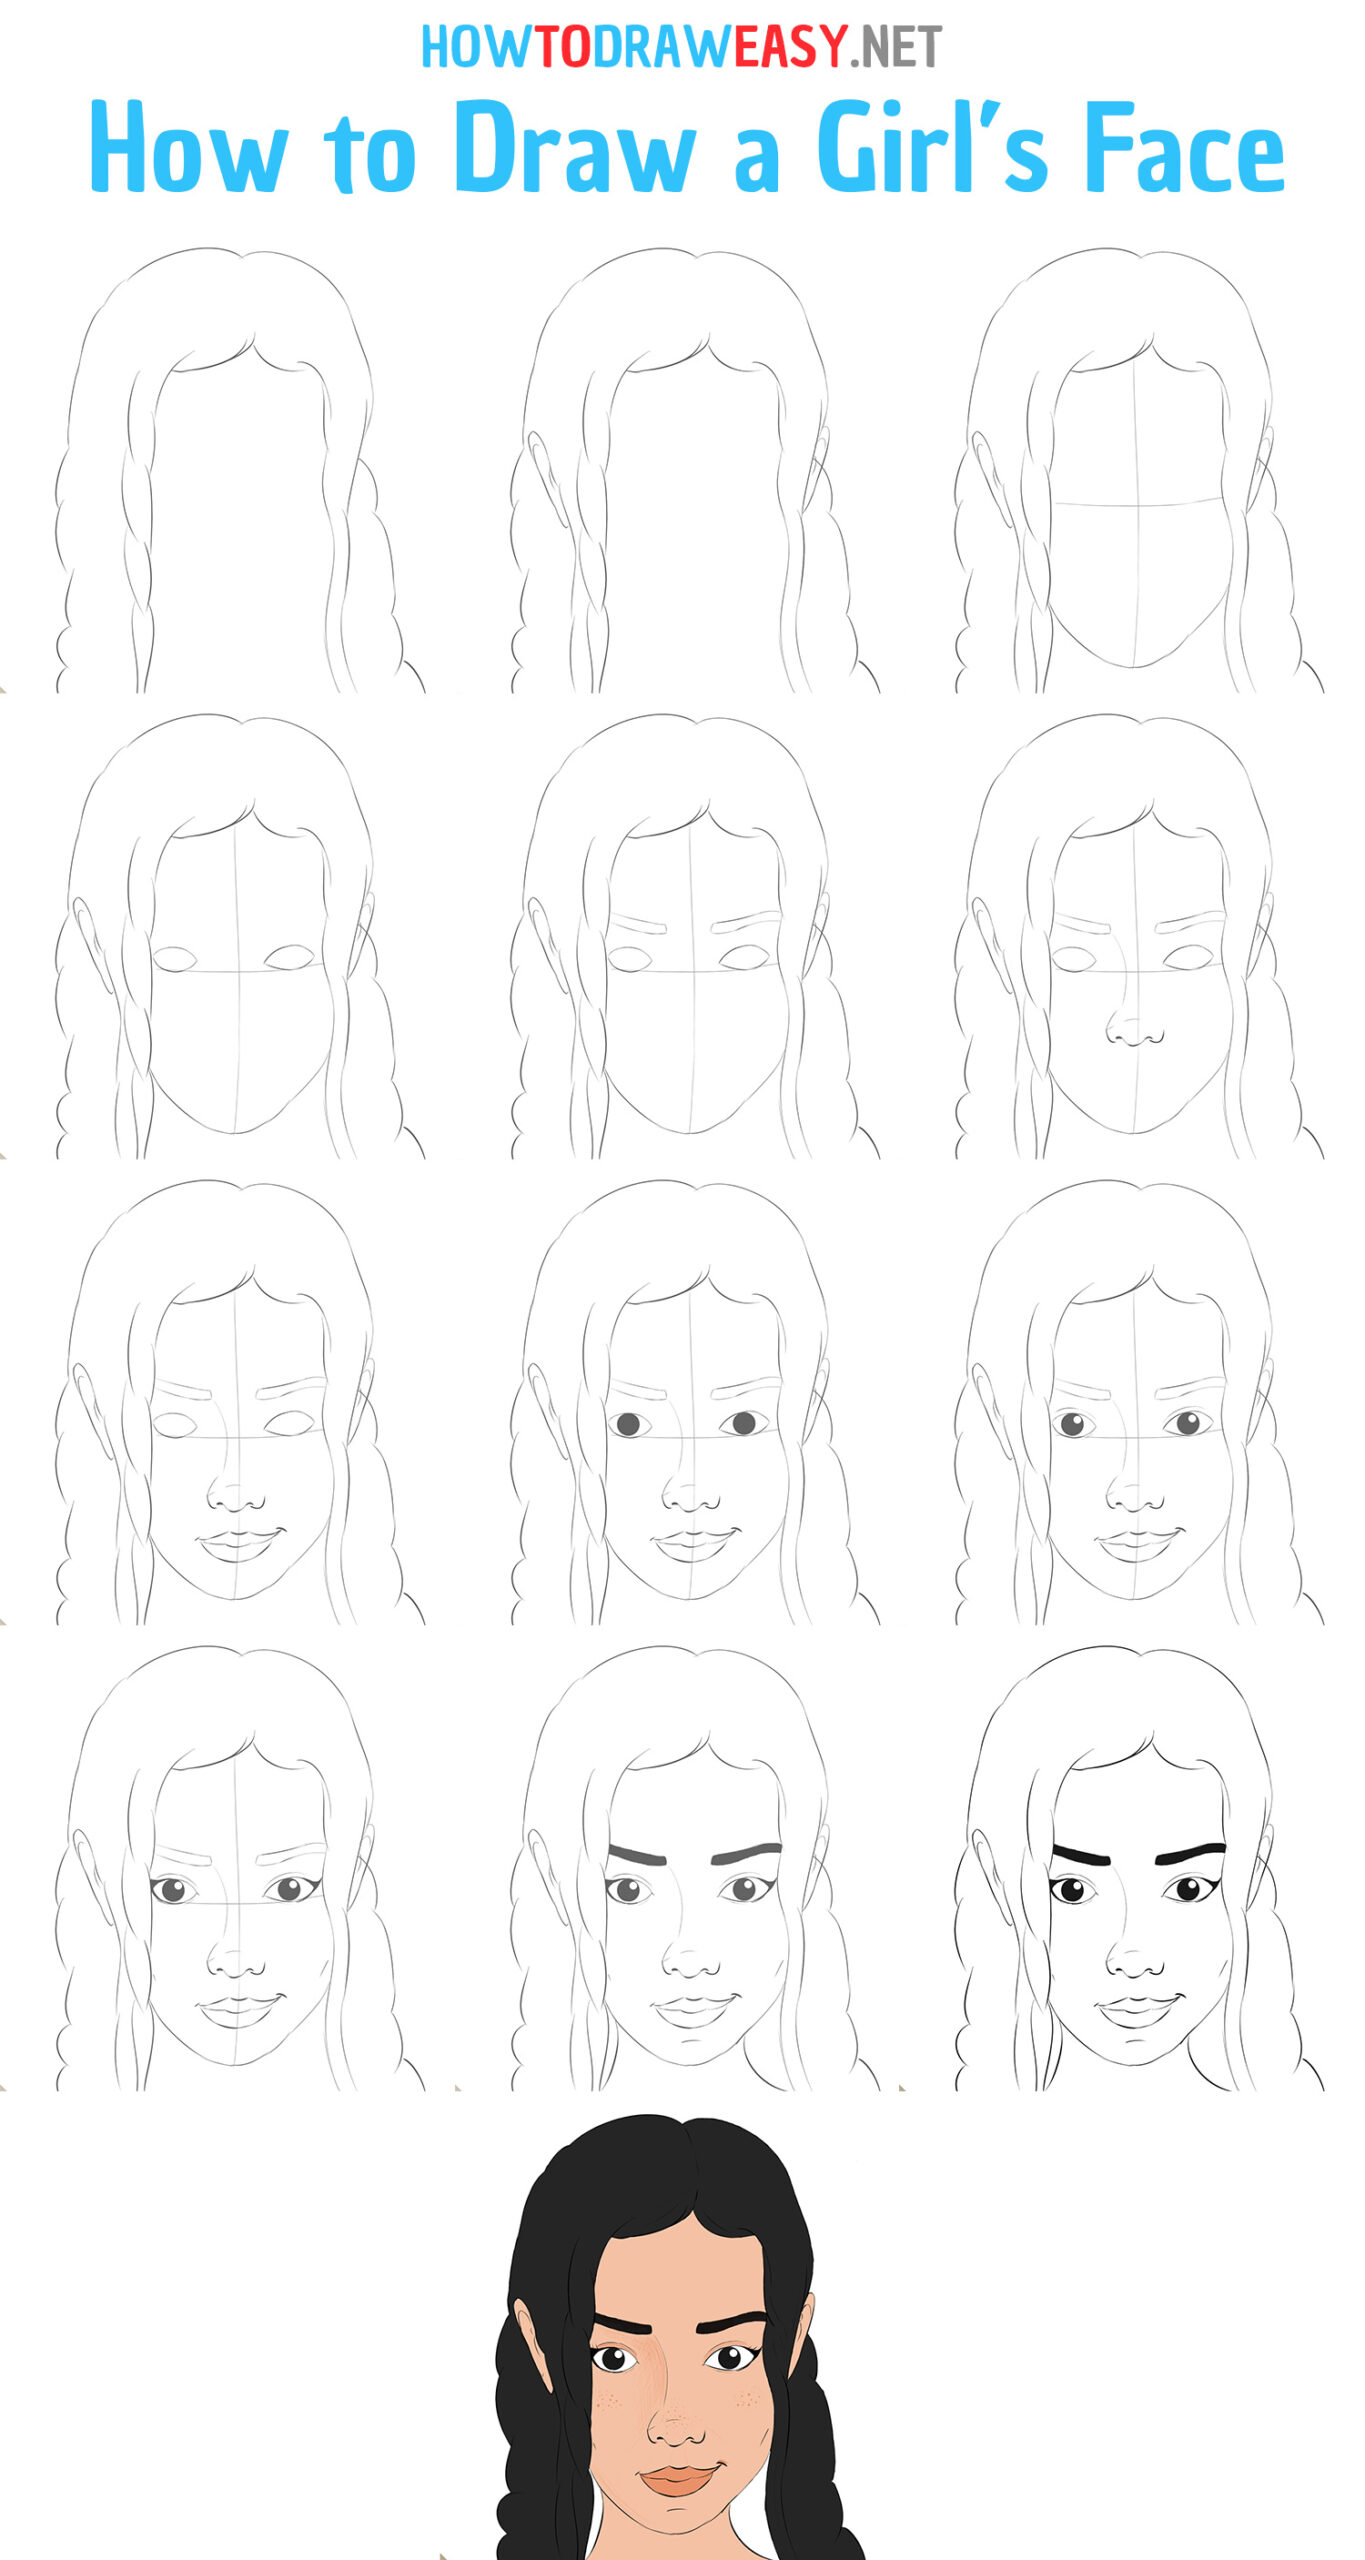 How to Draw a Girl's Face Step by Step